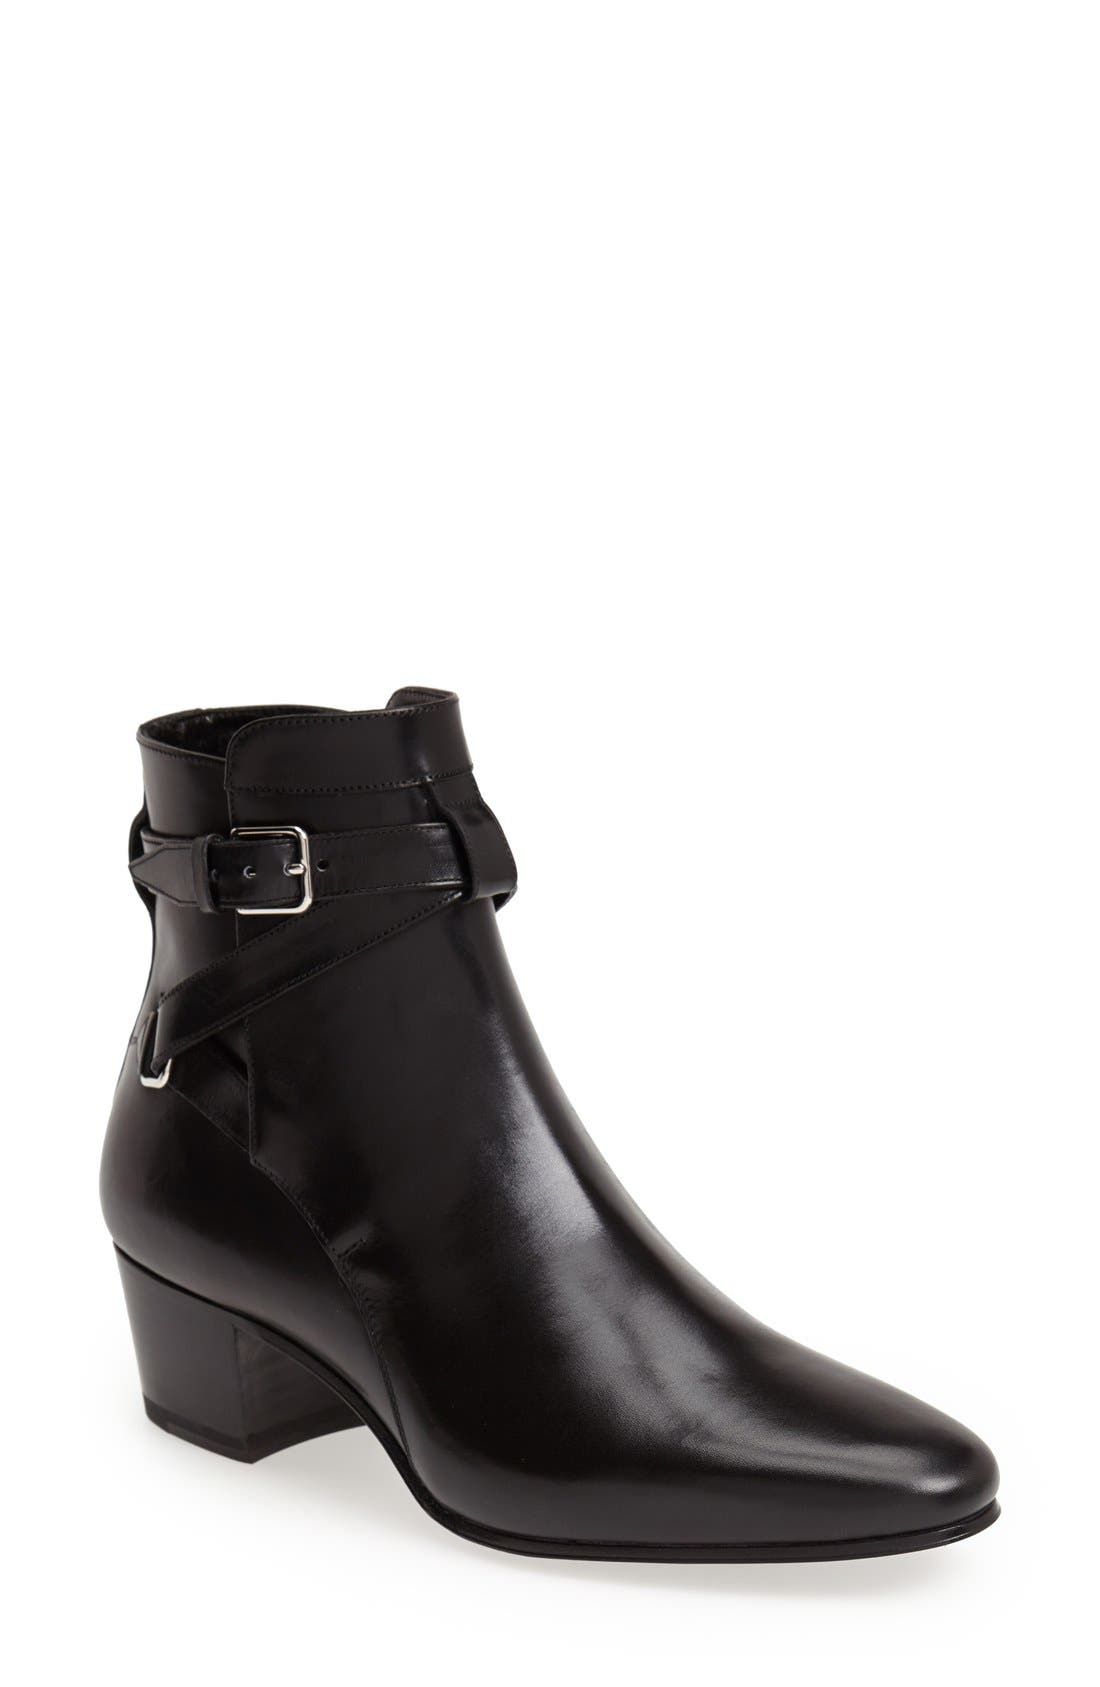 ysl womens boots